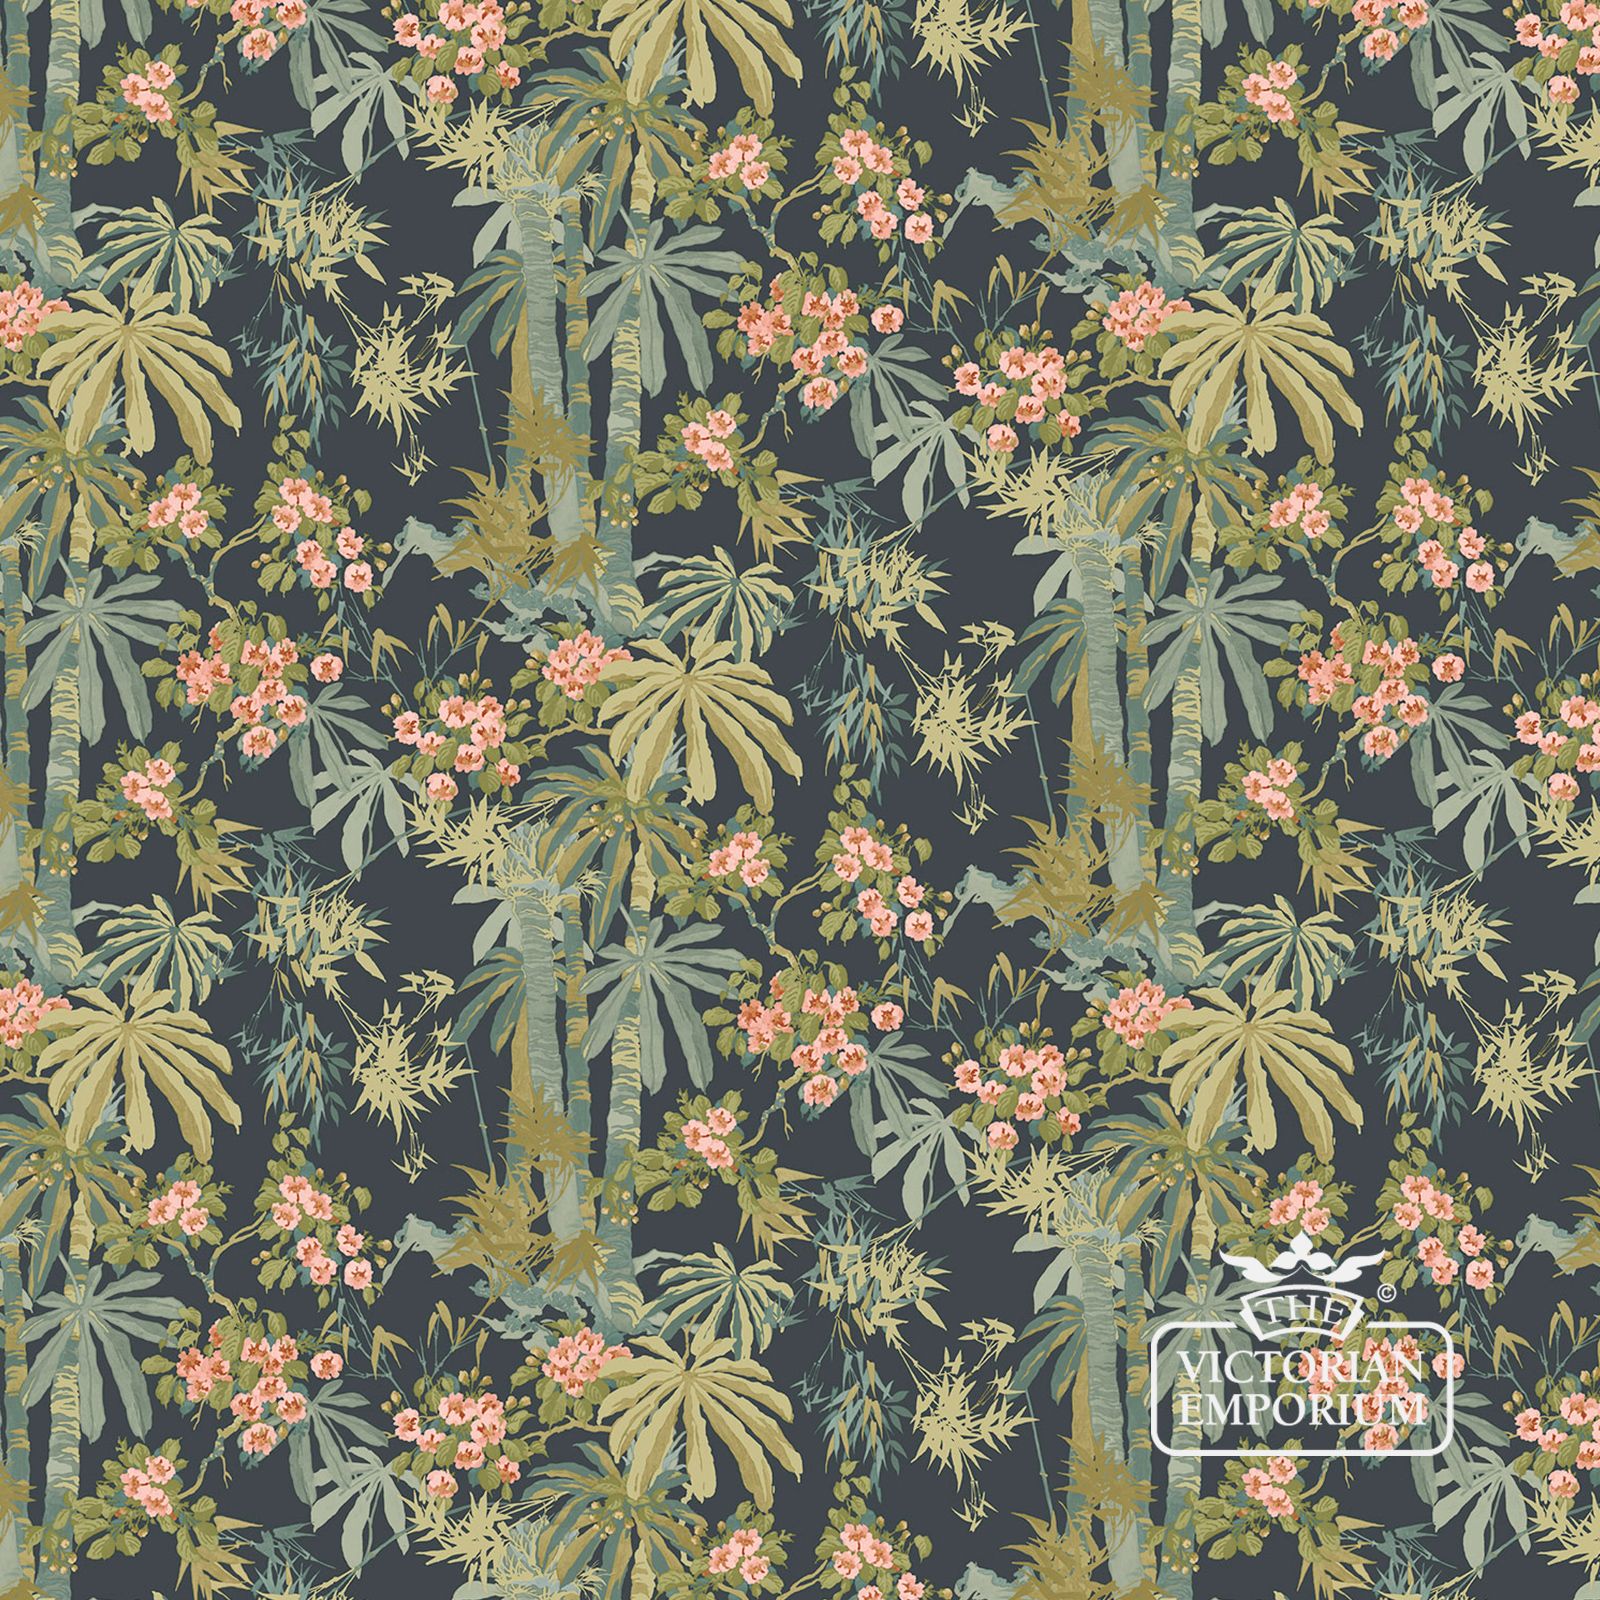 Bamboo Garden wallpaper in navy, green, red or pink